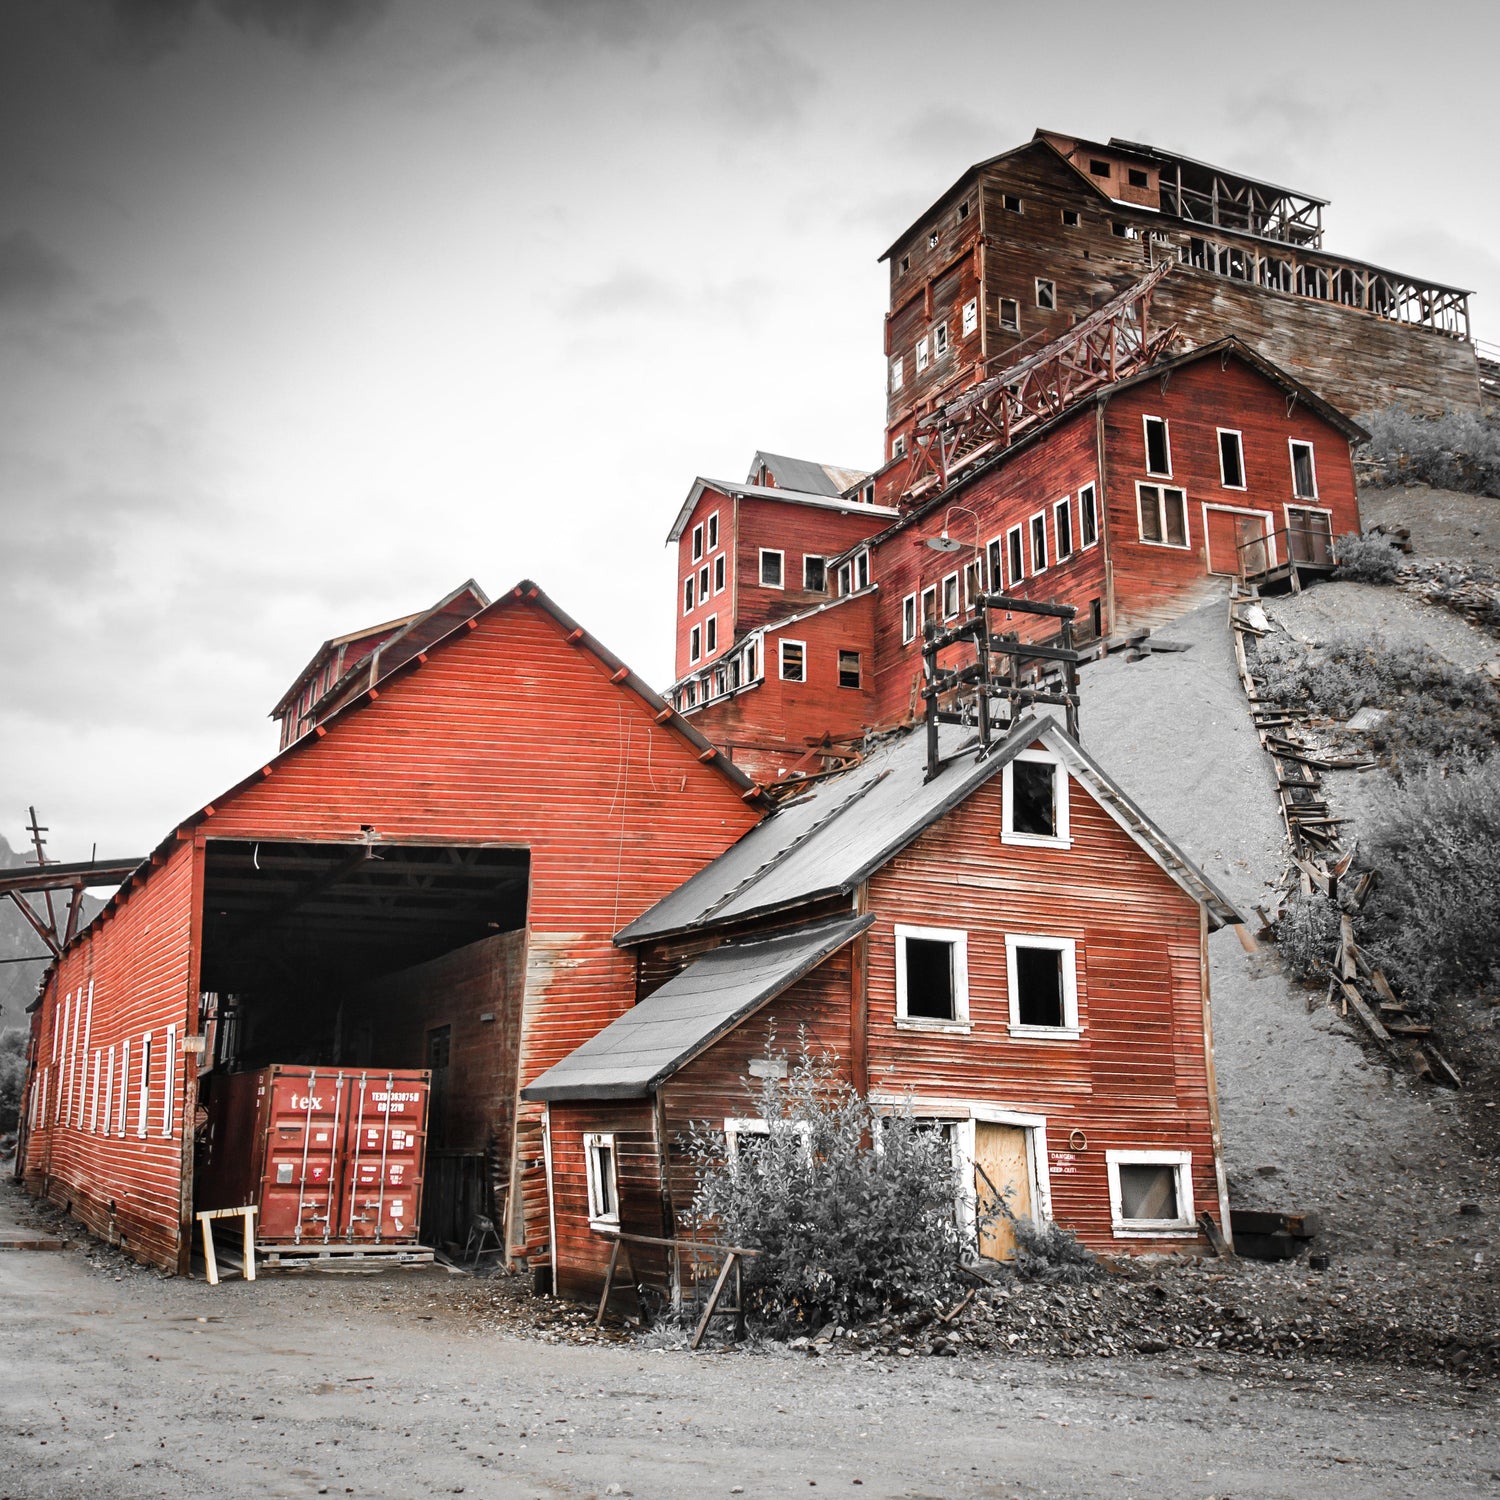 Fine photographic and art print of the towering red buildings of the Kennecott Mine in Wrangell St Elias National Park in Alaska.